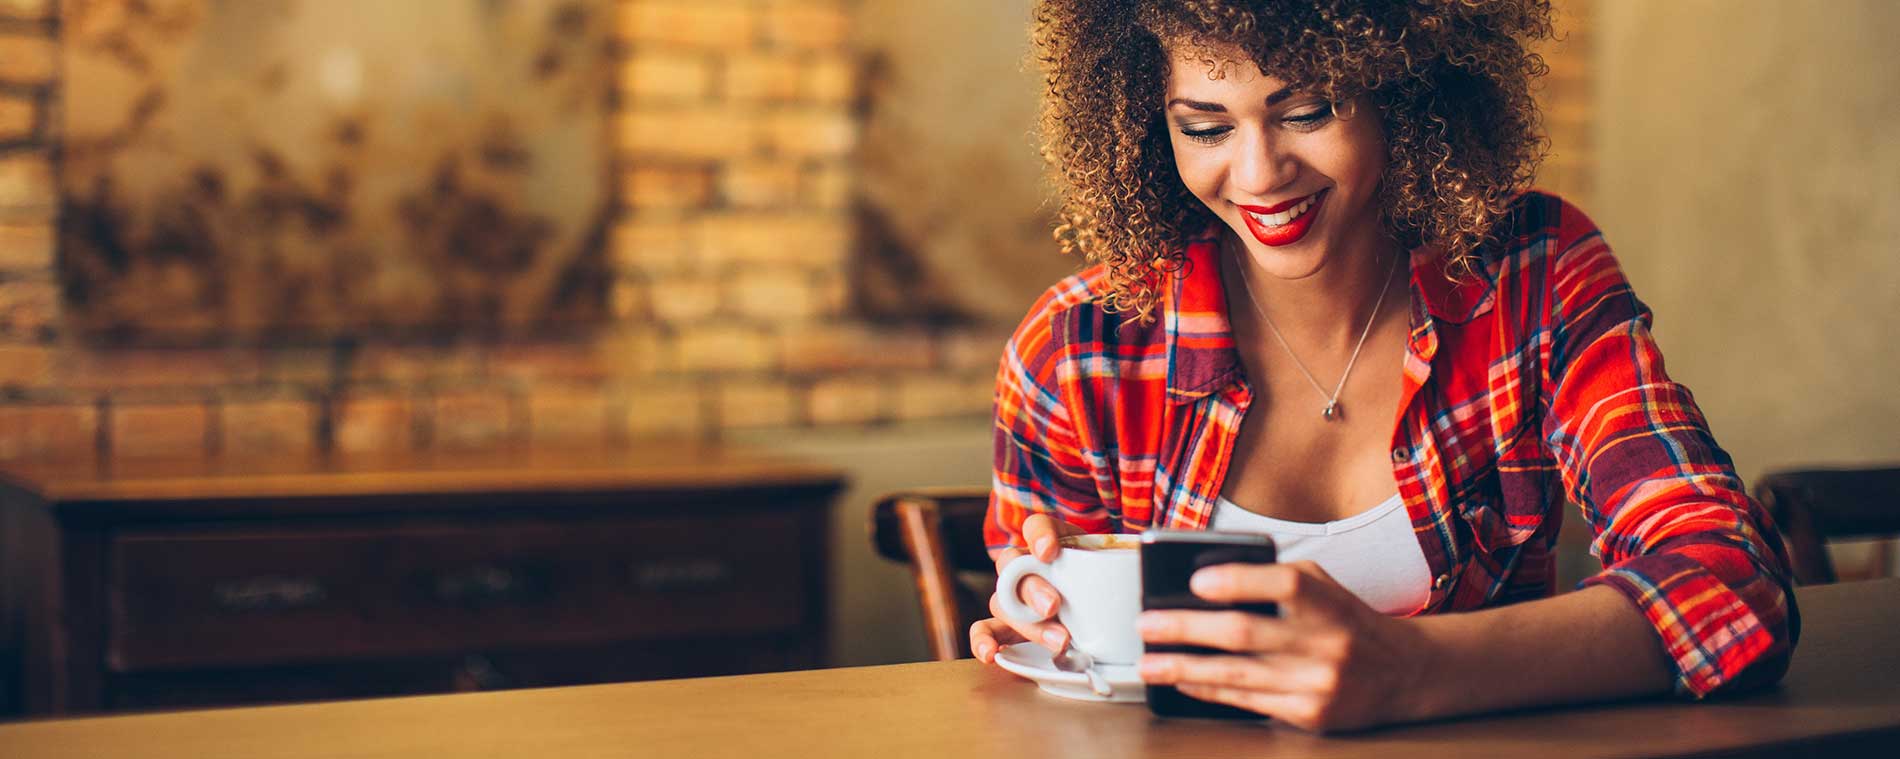 A young woman is sitting in a coffee shop, cup in hand, smiling and looking down at her smartphone.